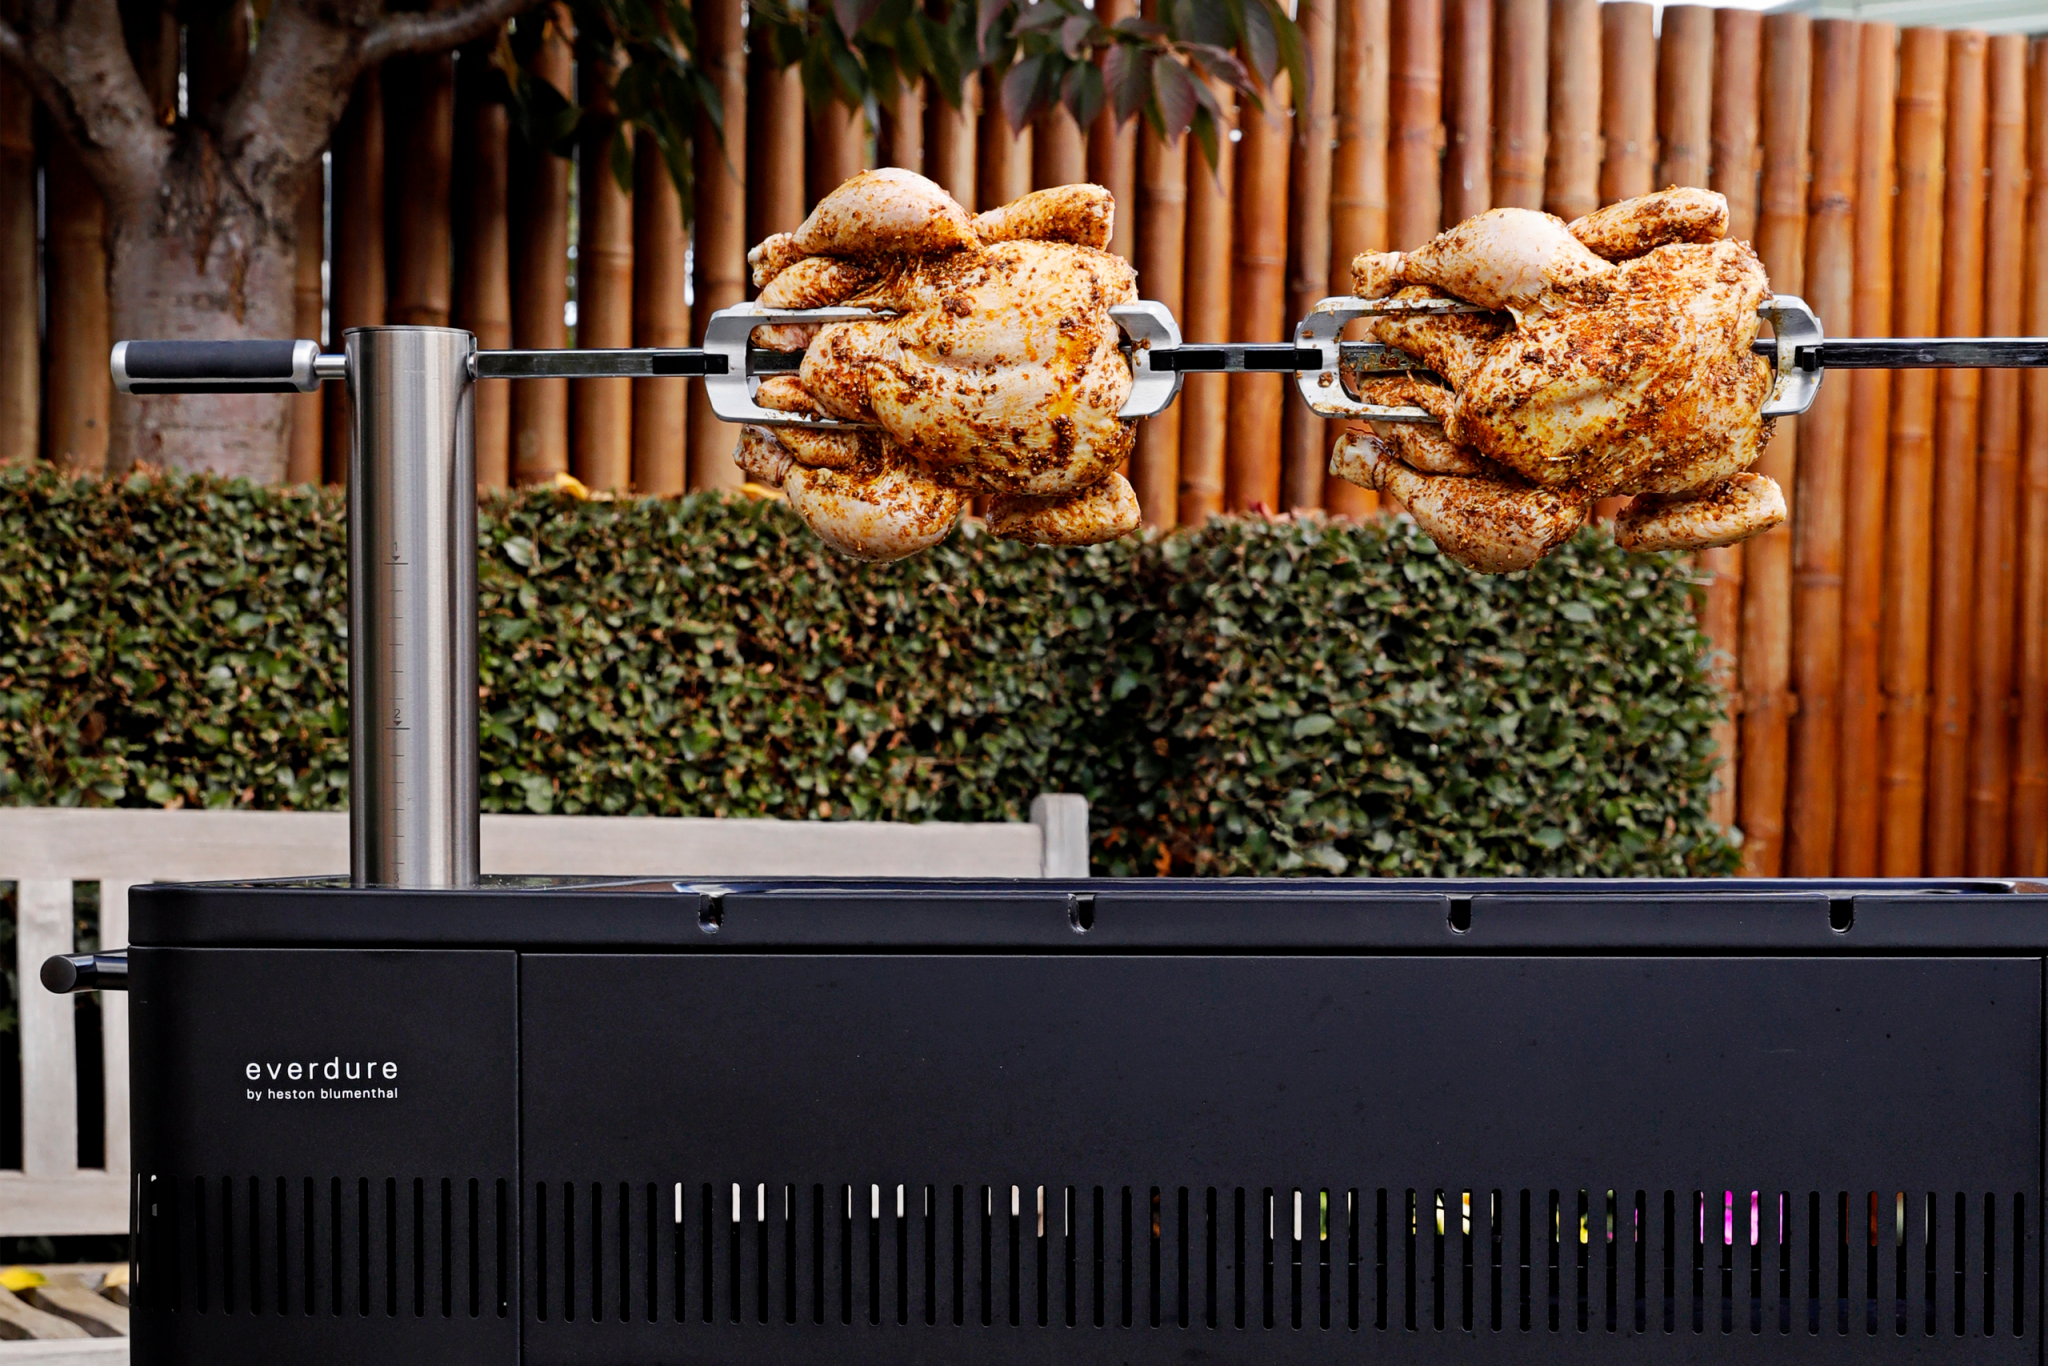 Everdure HUB I 54-Inch Charcoal Grill W/ Rotisserie & Electronic Ignition - HBCE2BBUS